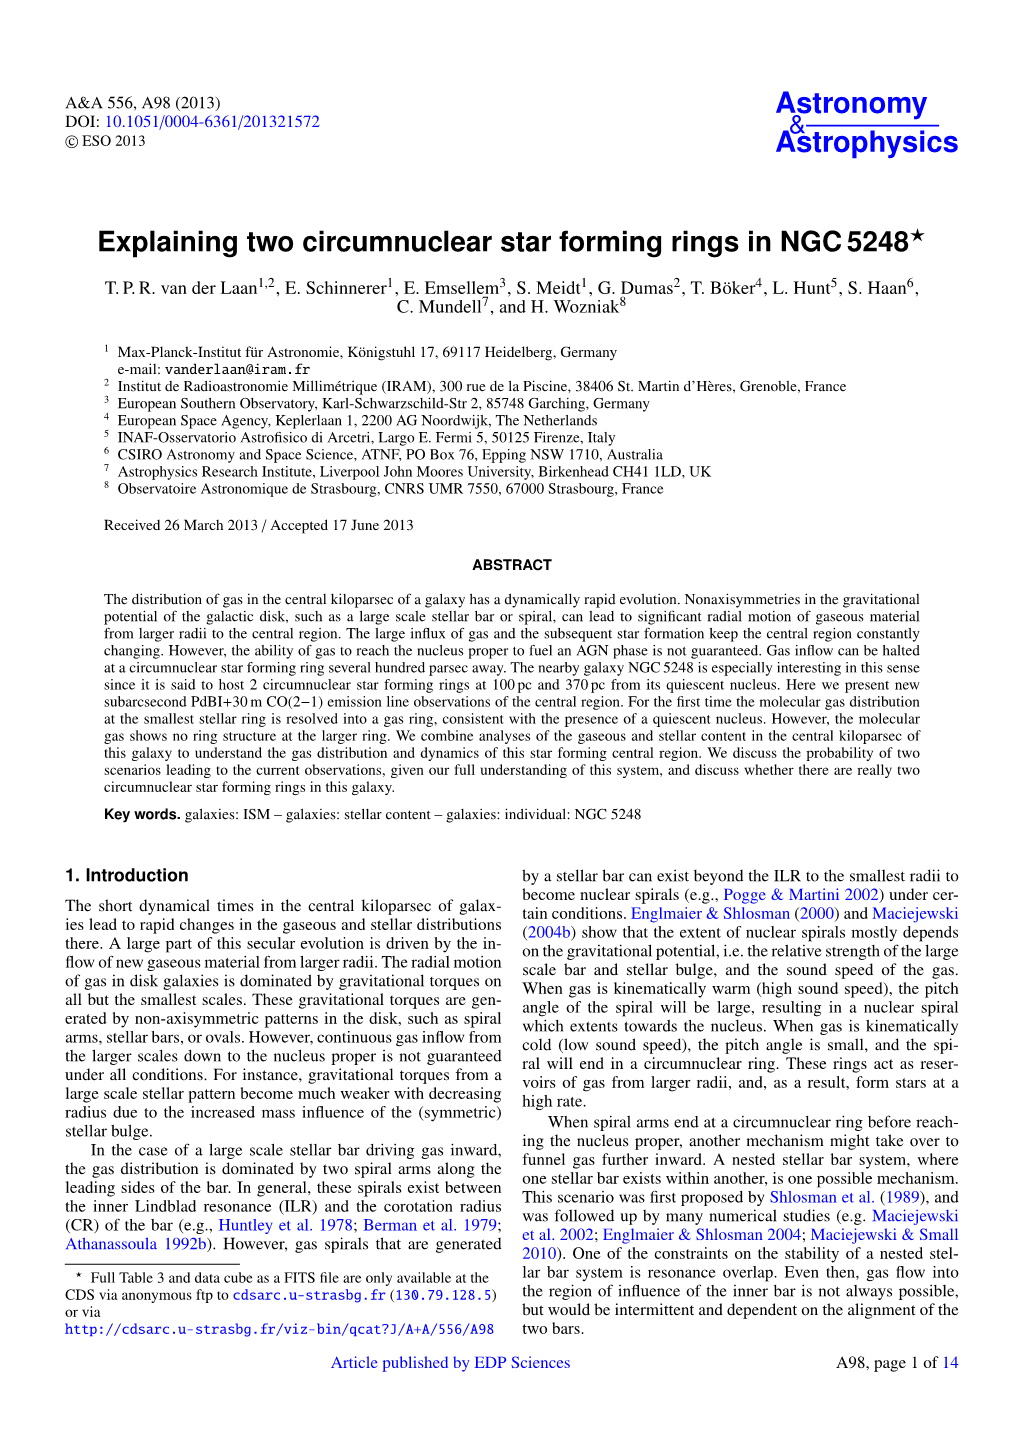 Explaining Two Circumnuclear Star Forming Rings in NGC 5248⋆